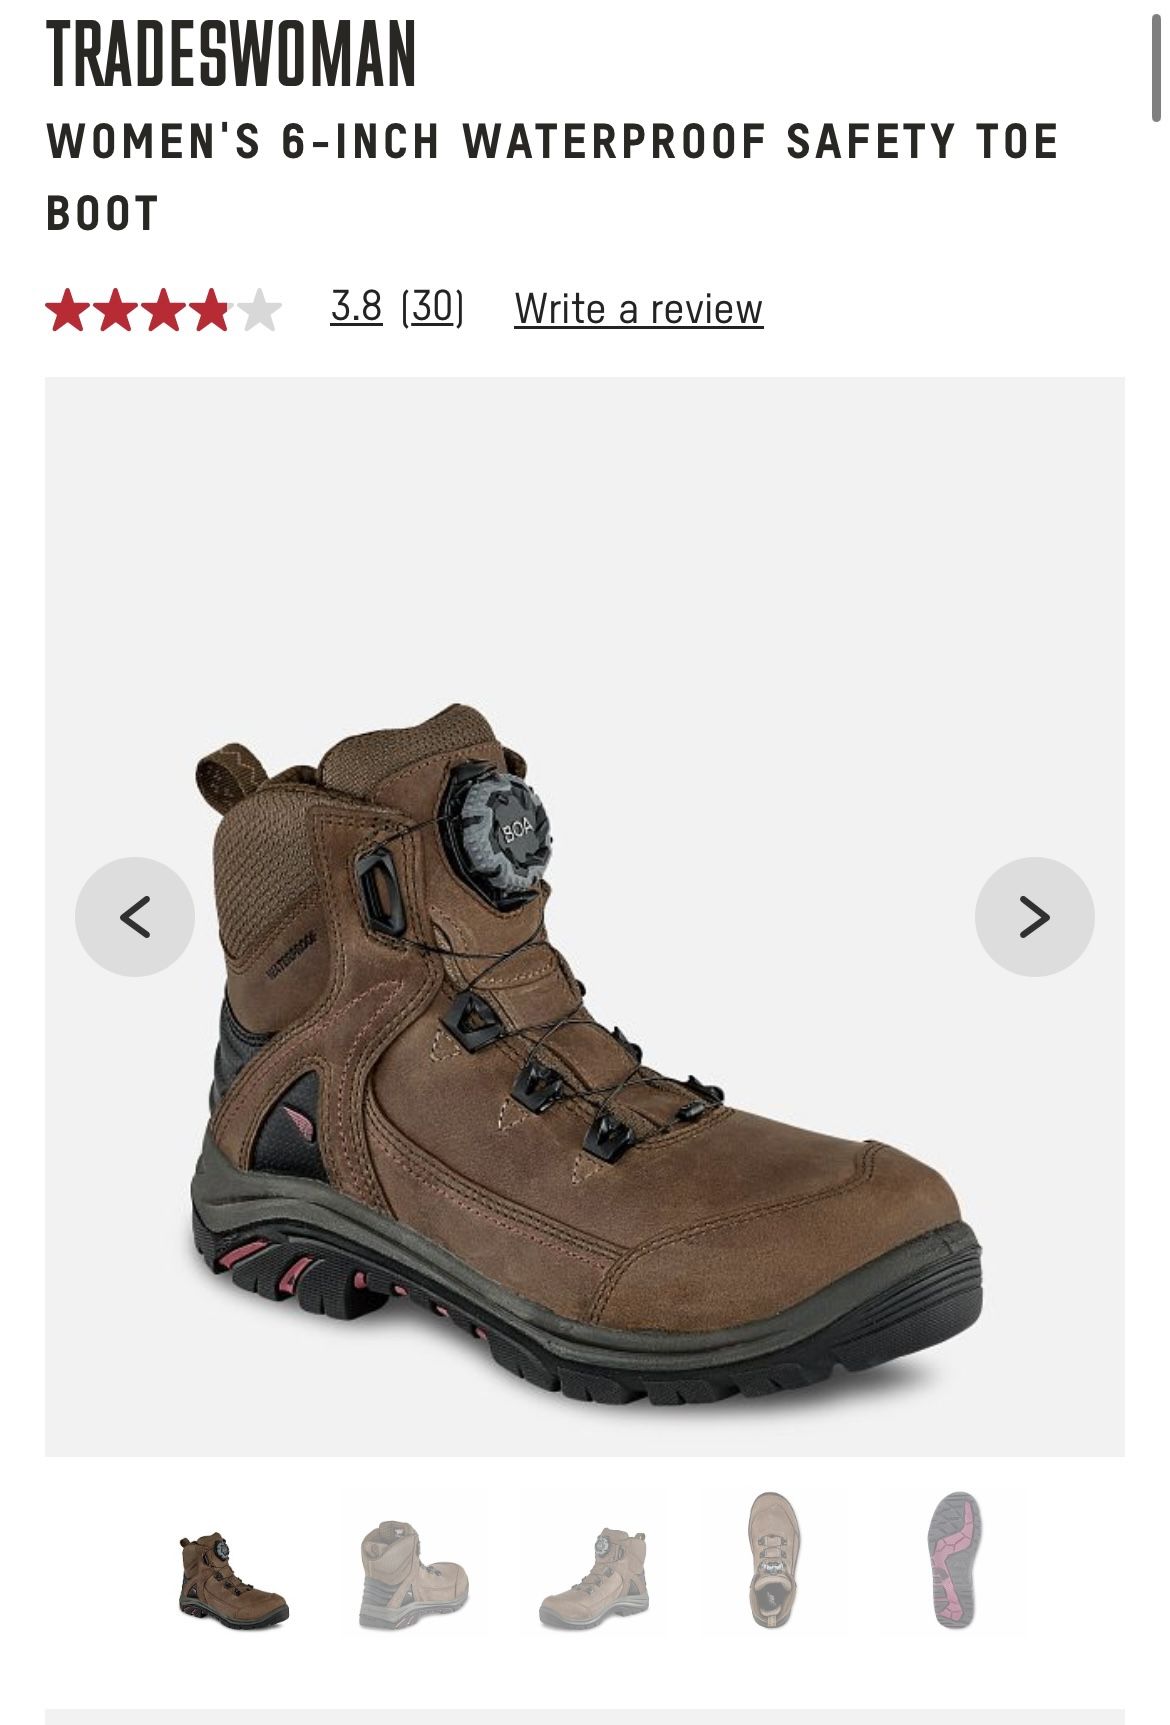 Red Wing Women’s 7 Work Boots 